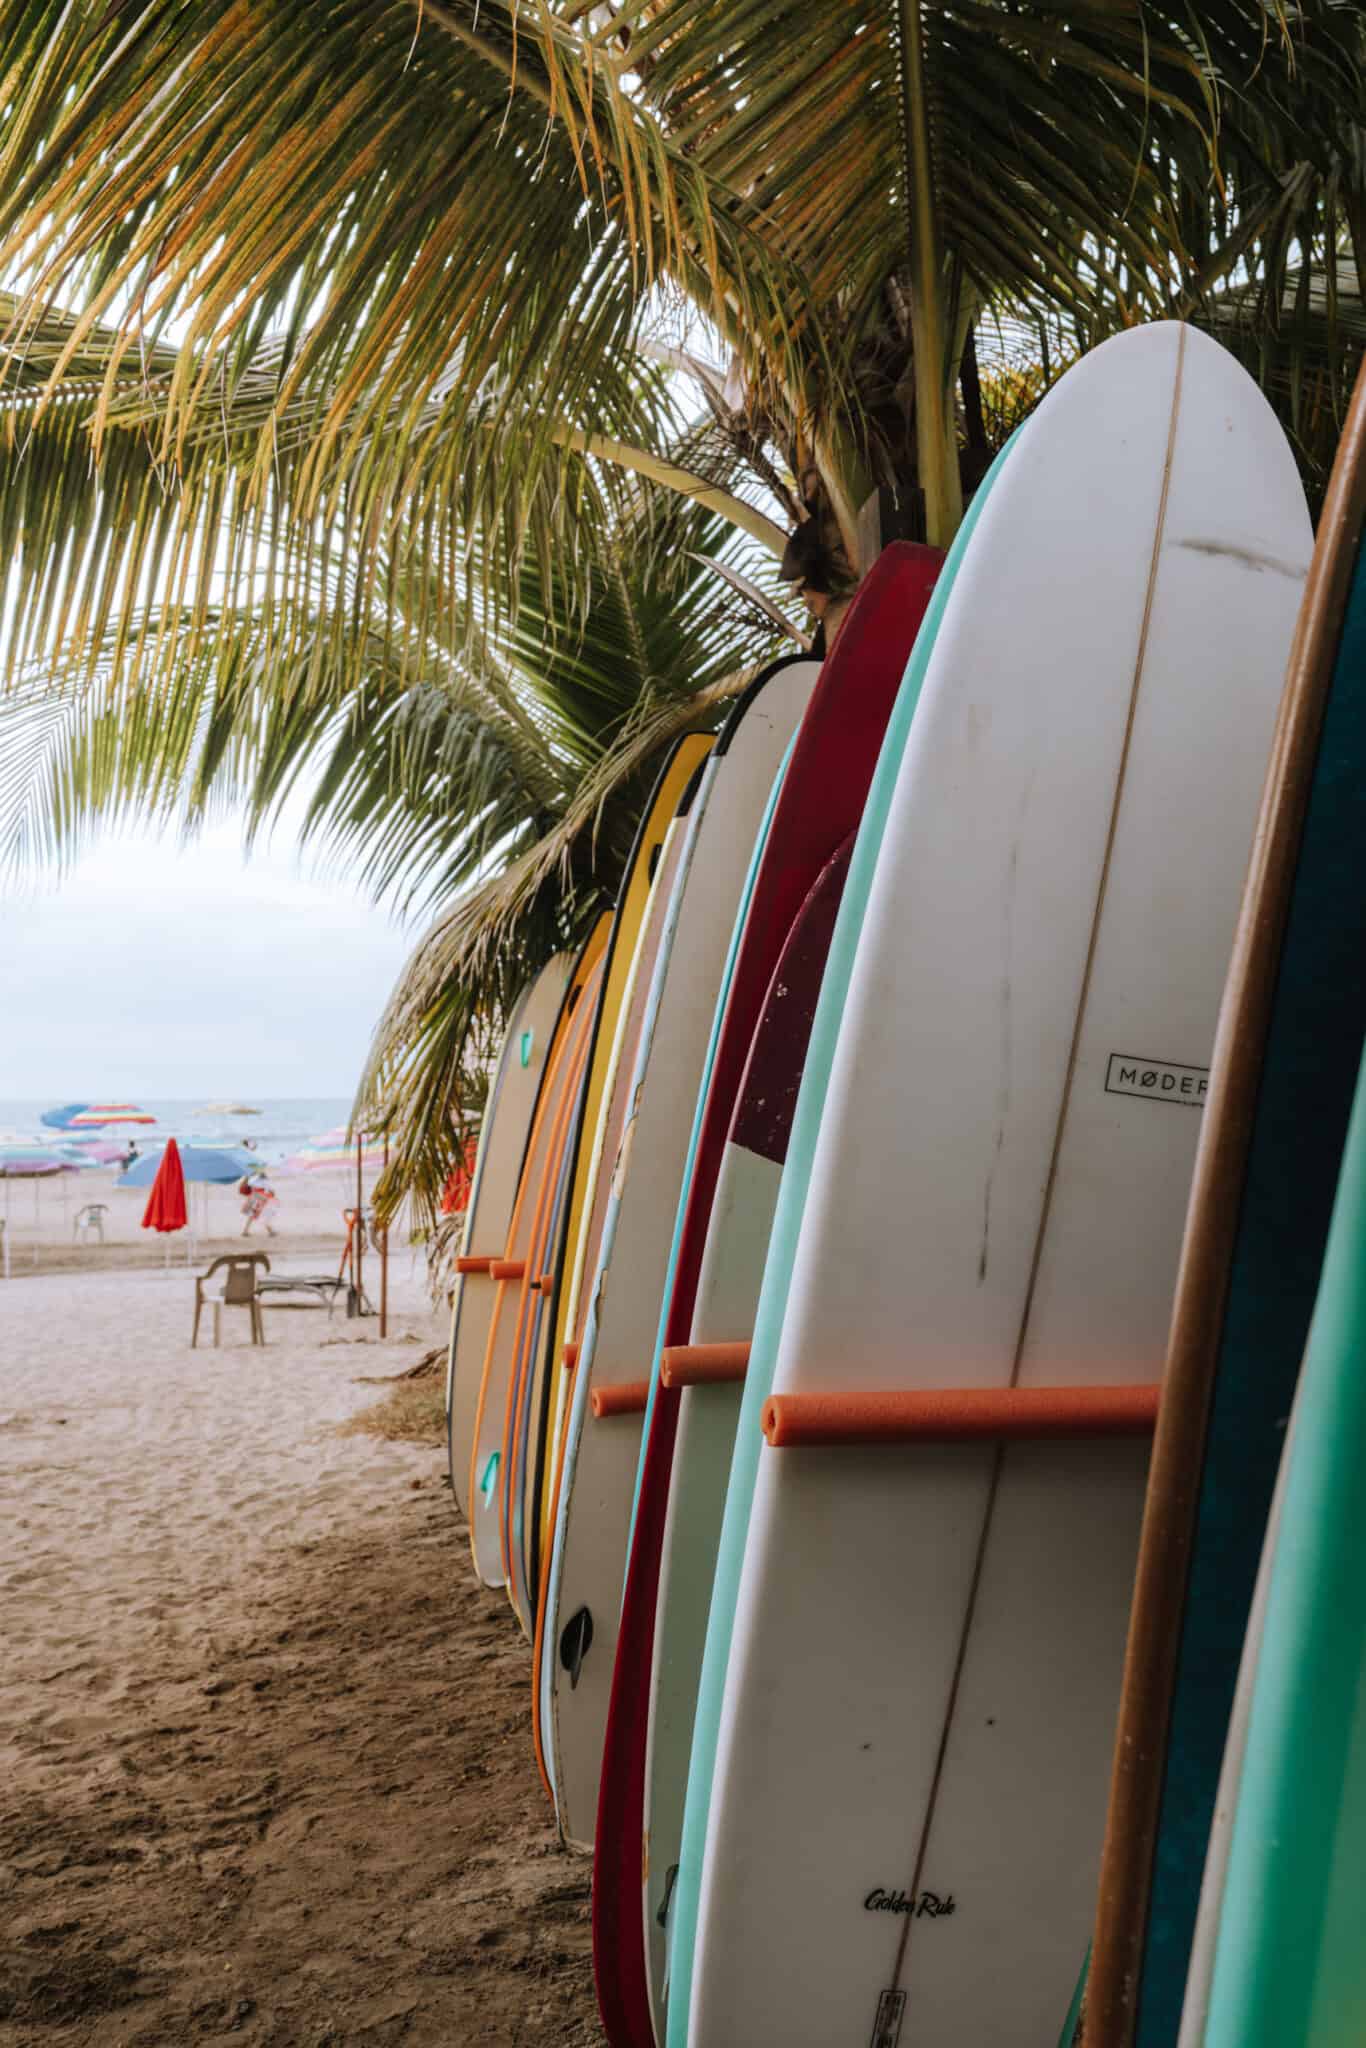 A group of surfboards leaning against a palm tree in Sayulita.